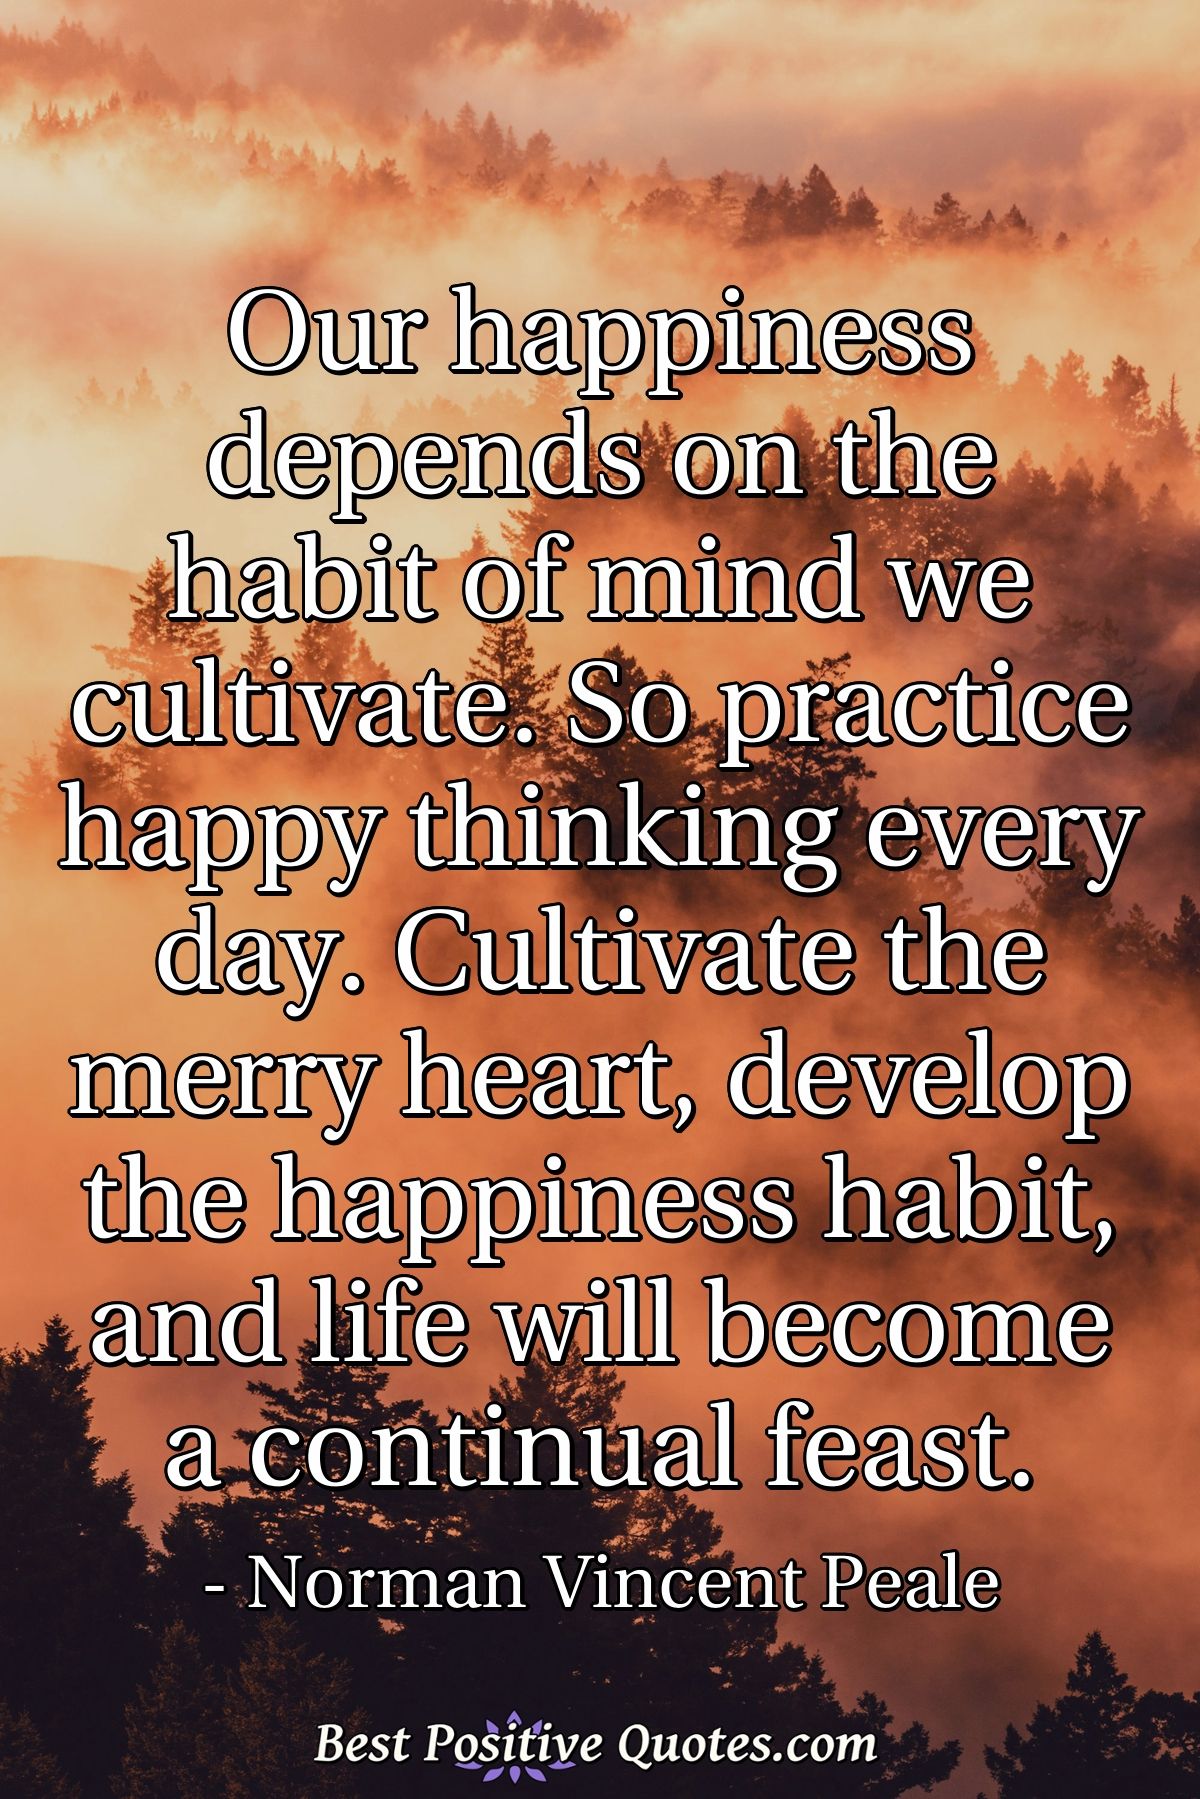 Our happiness depends on the habit of mind we cultivate. So practice happy thinking every day. Cultivate the merry heart, develop the happiness habit, and life will become a continual feast. - Norman Vincent Peale